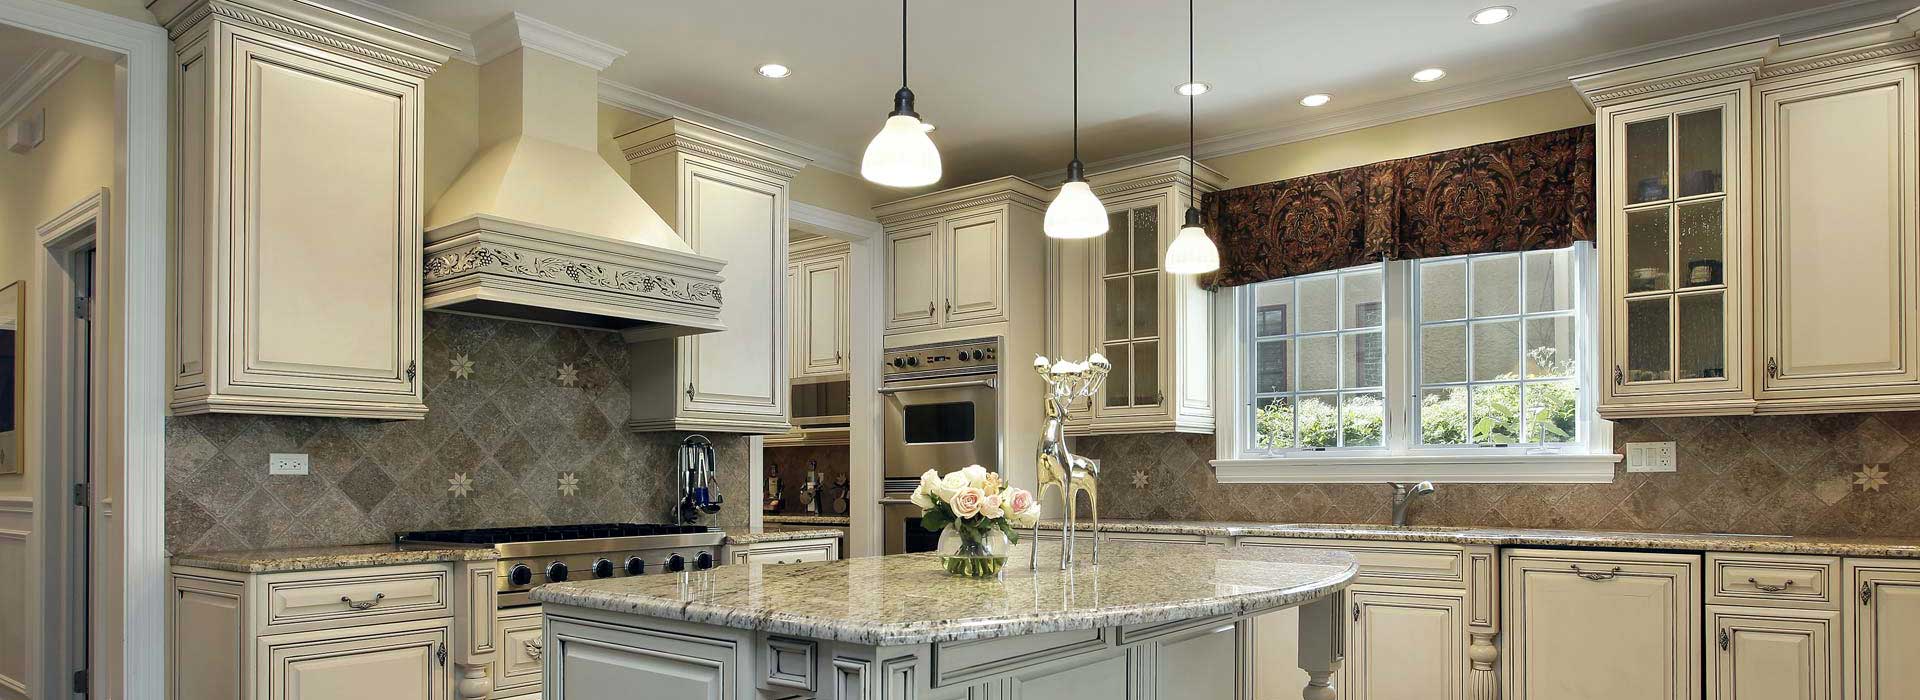 Kitchen Cabinet Refacing - New Look Kitchen Refacing NY